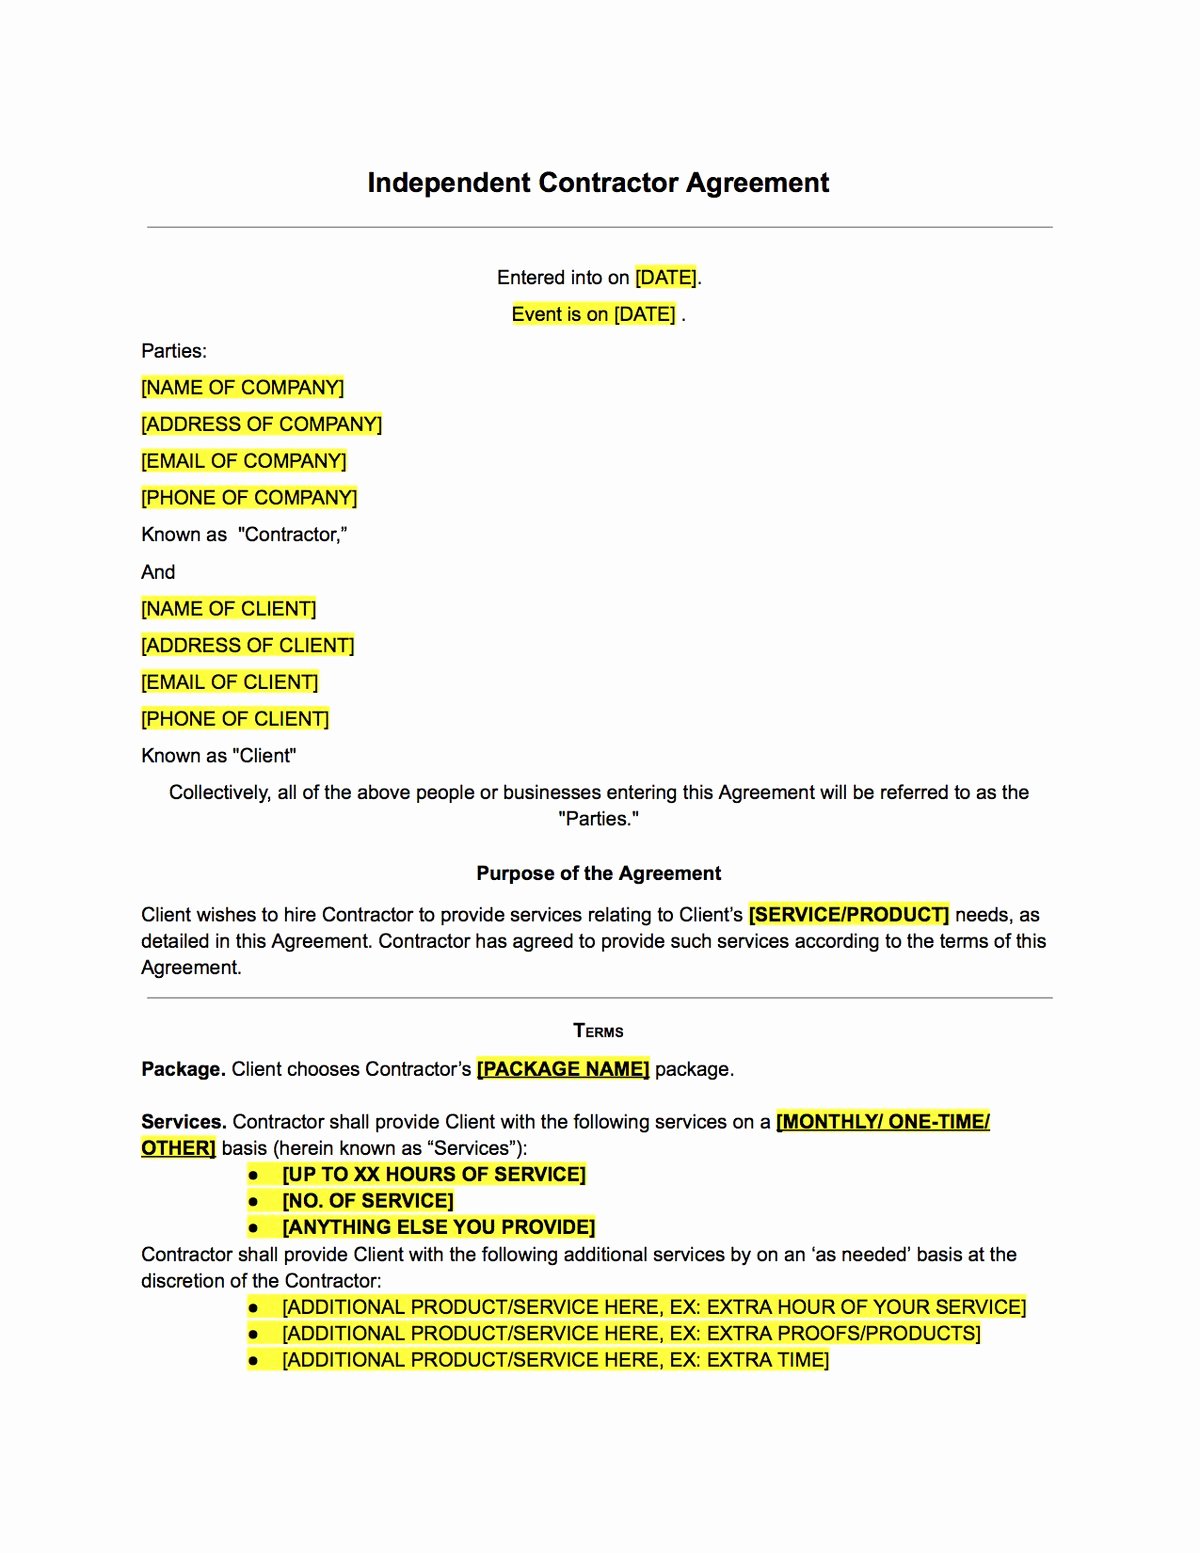 Independent Contractor Contract Template the Contract Shop